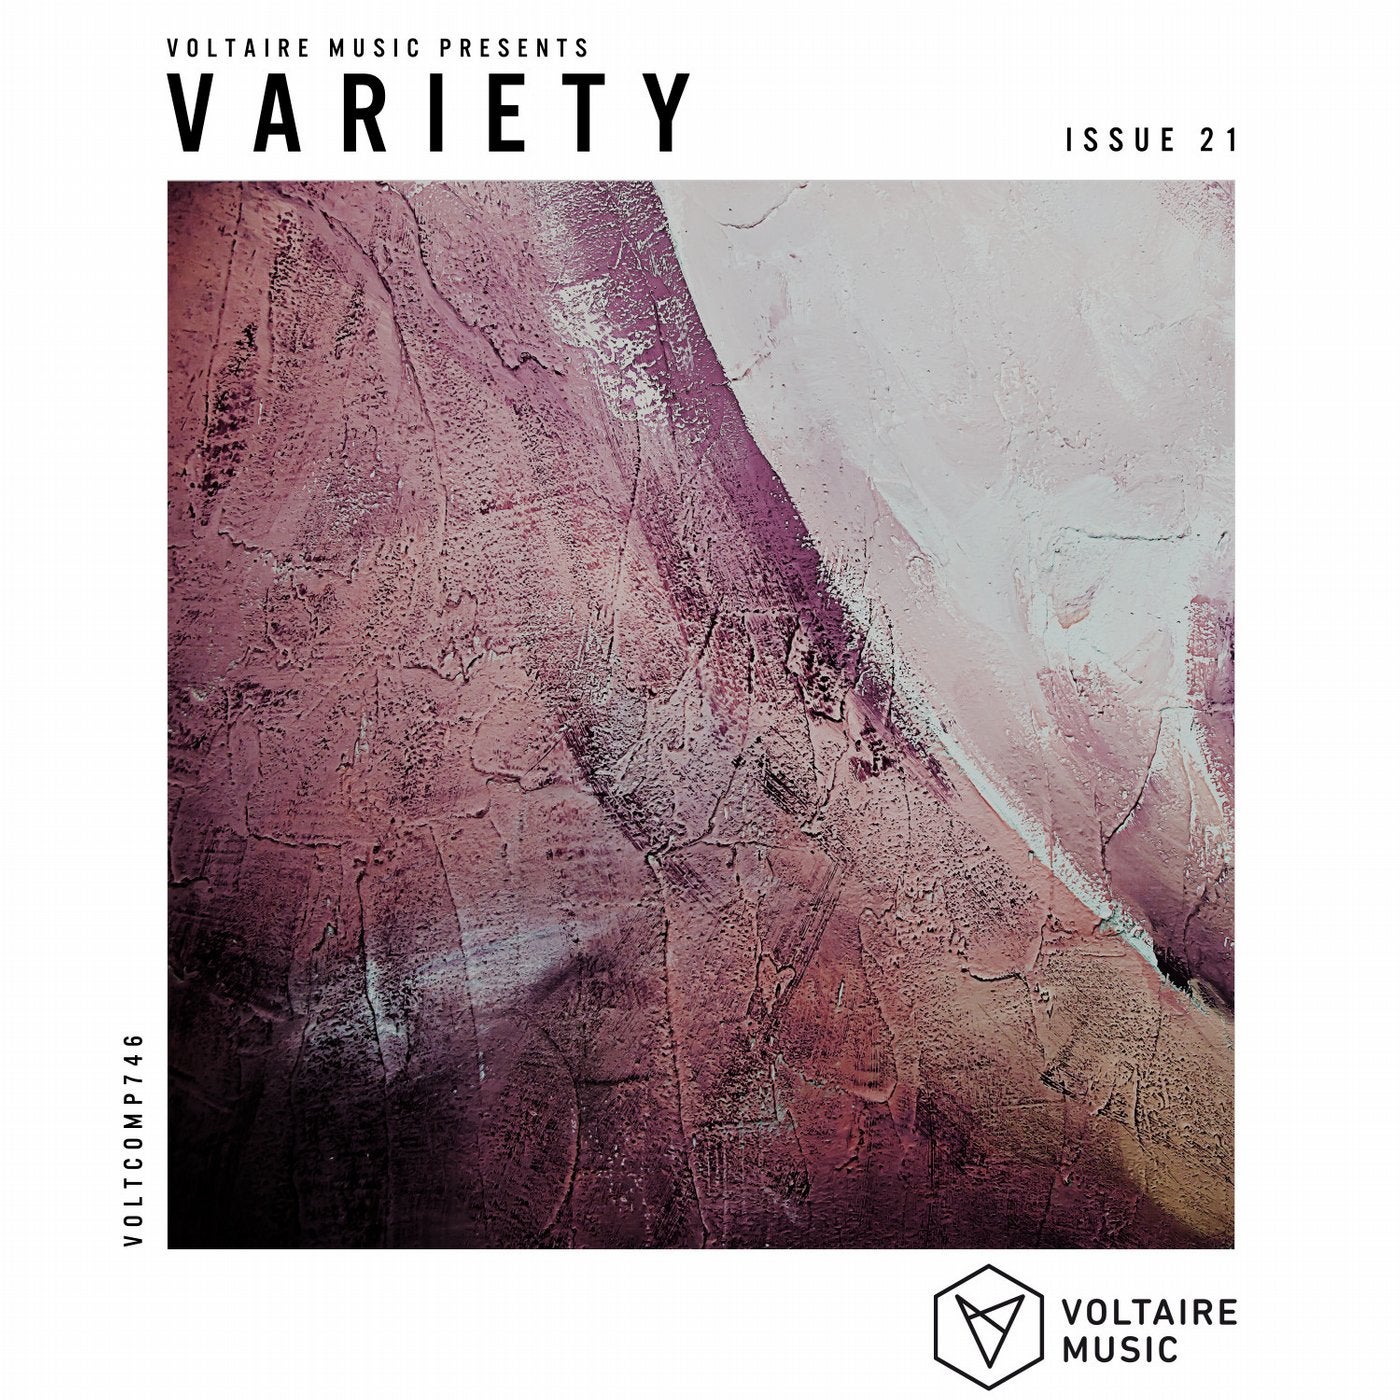 Voltaire Music pres. Variety Issue 21